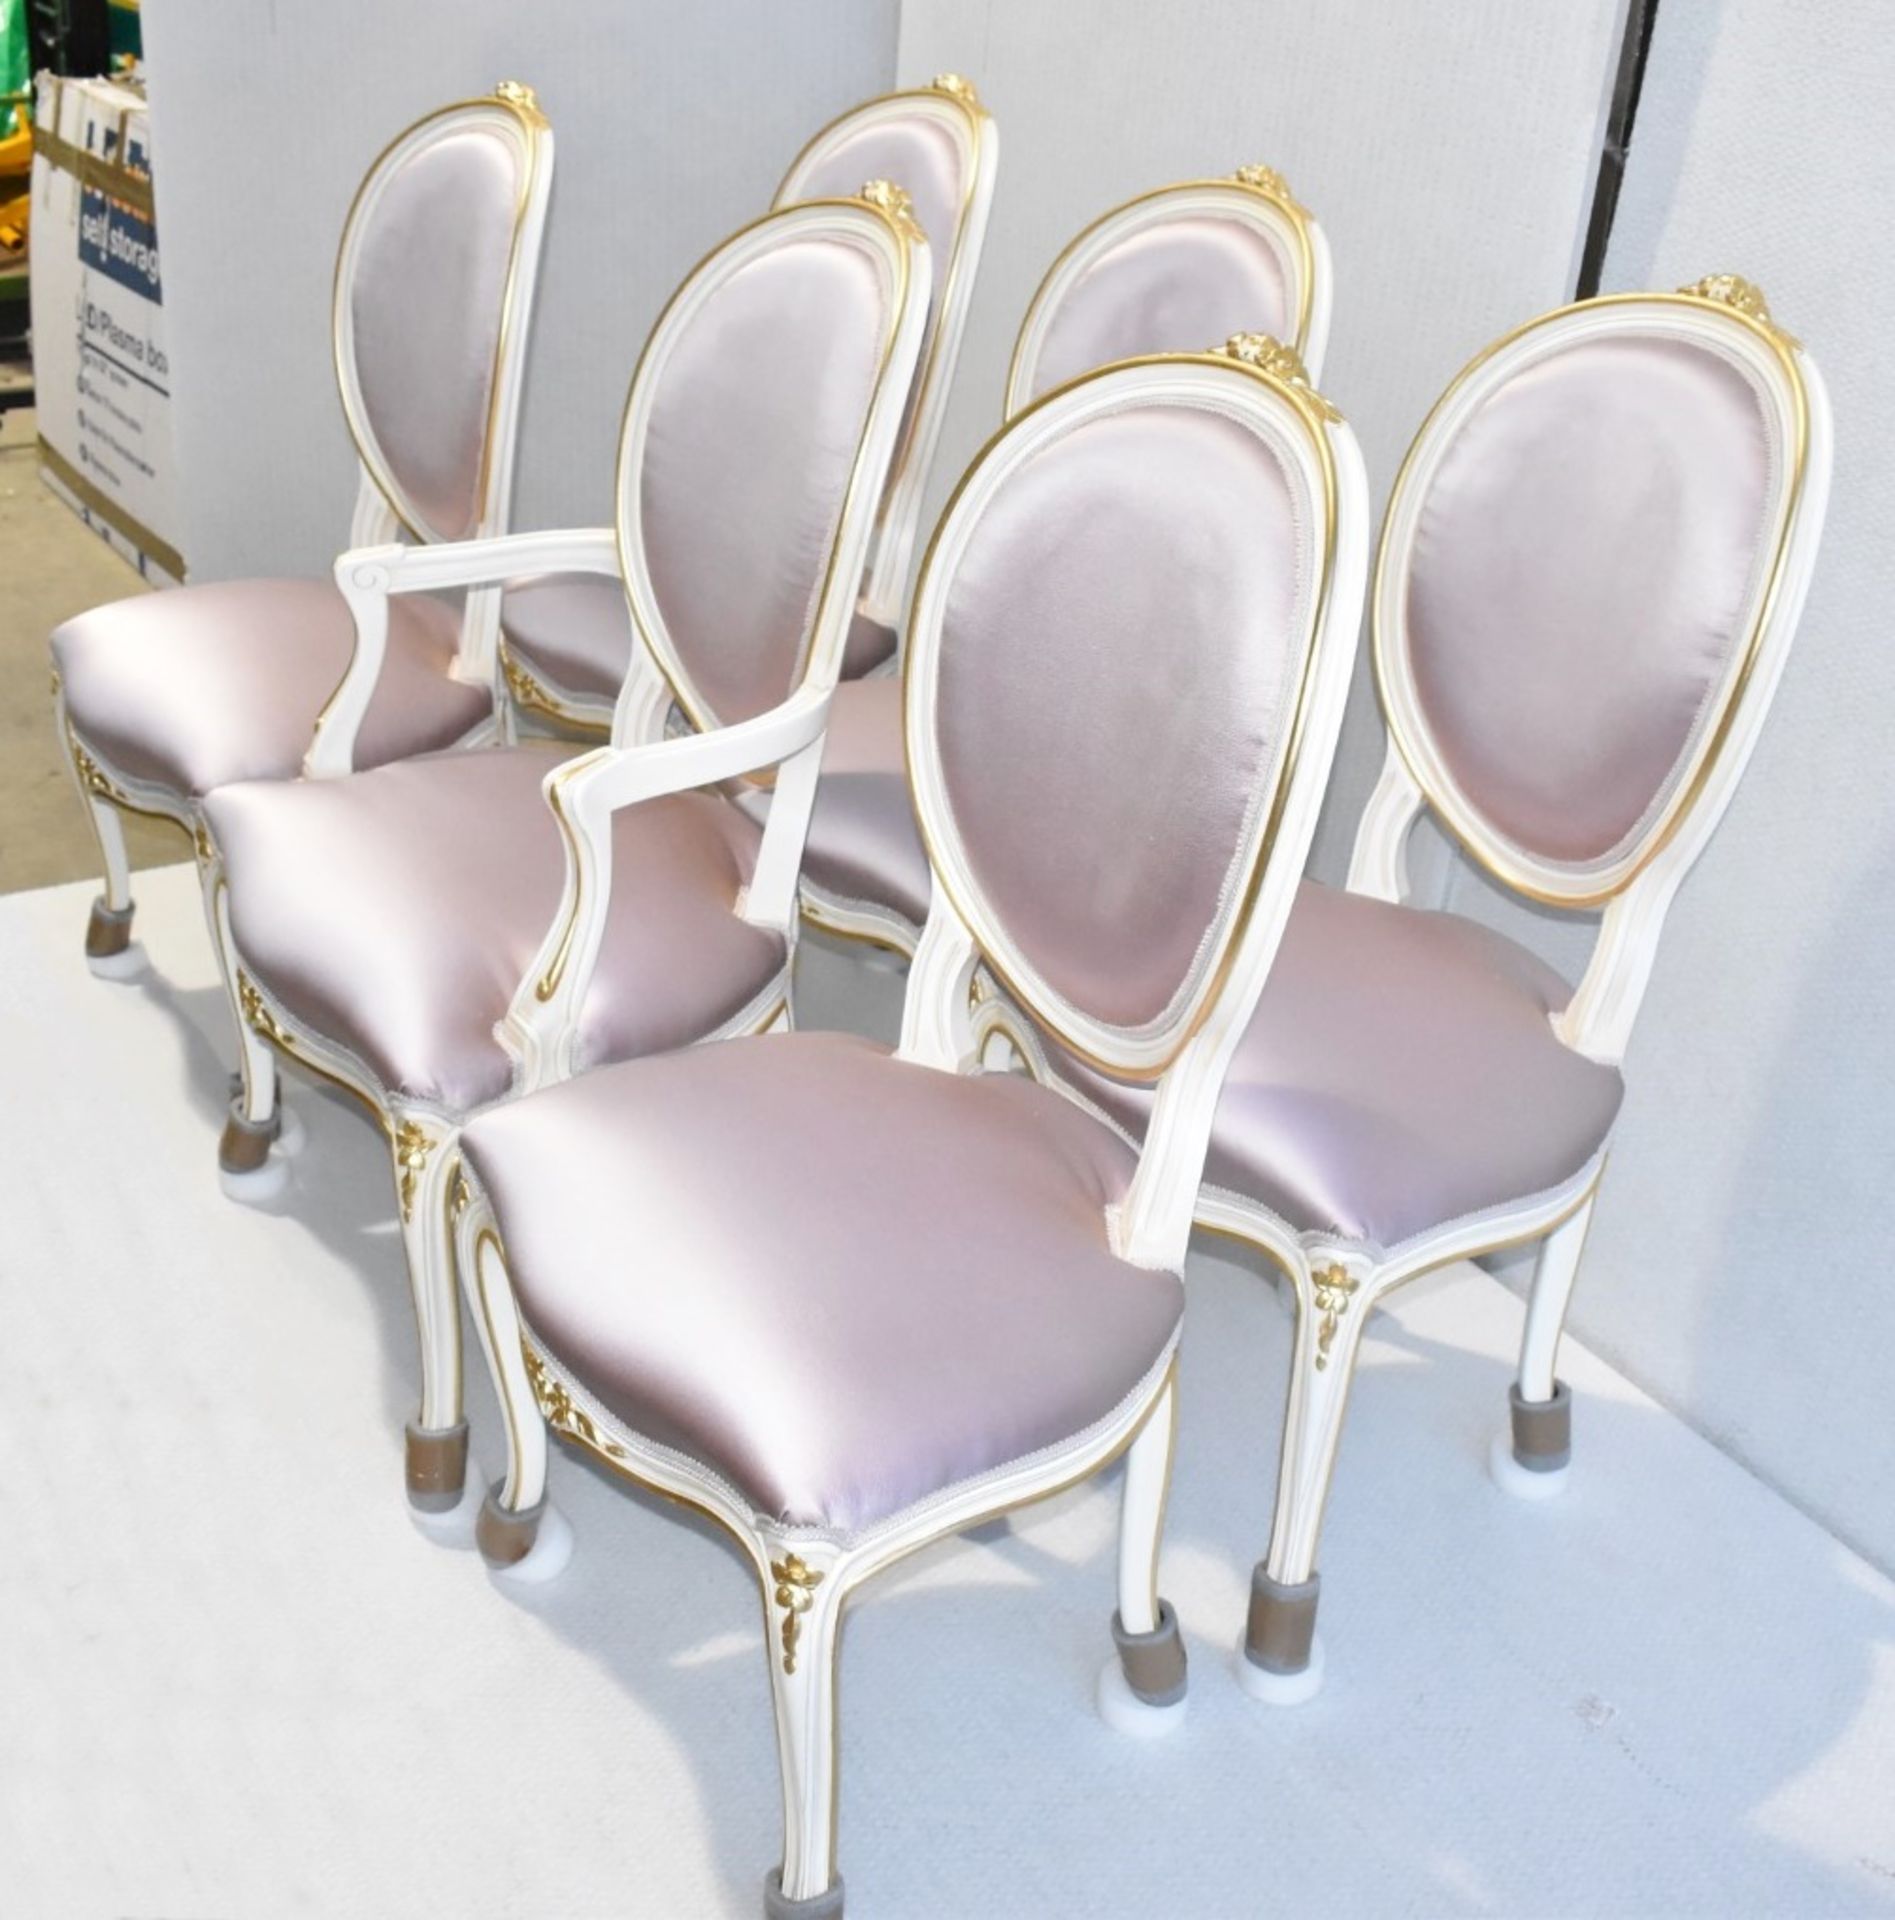 Set of 6 x ANGELO CAPPELLINI 'Timeless' Baroque-style Carved Dining Chairs, Upholstered in Pink Silk - Image 11 of 15